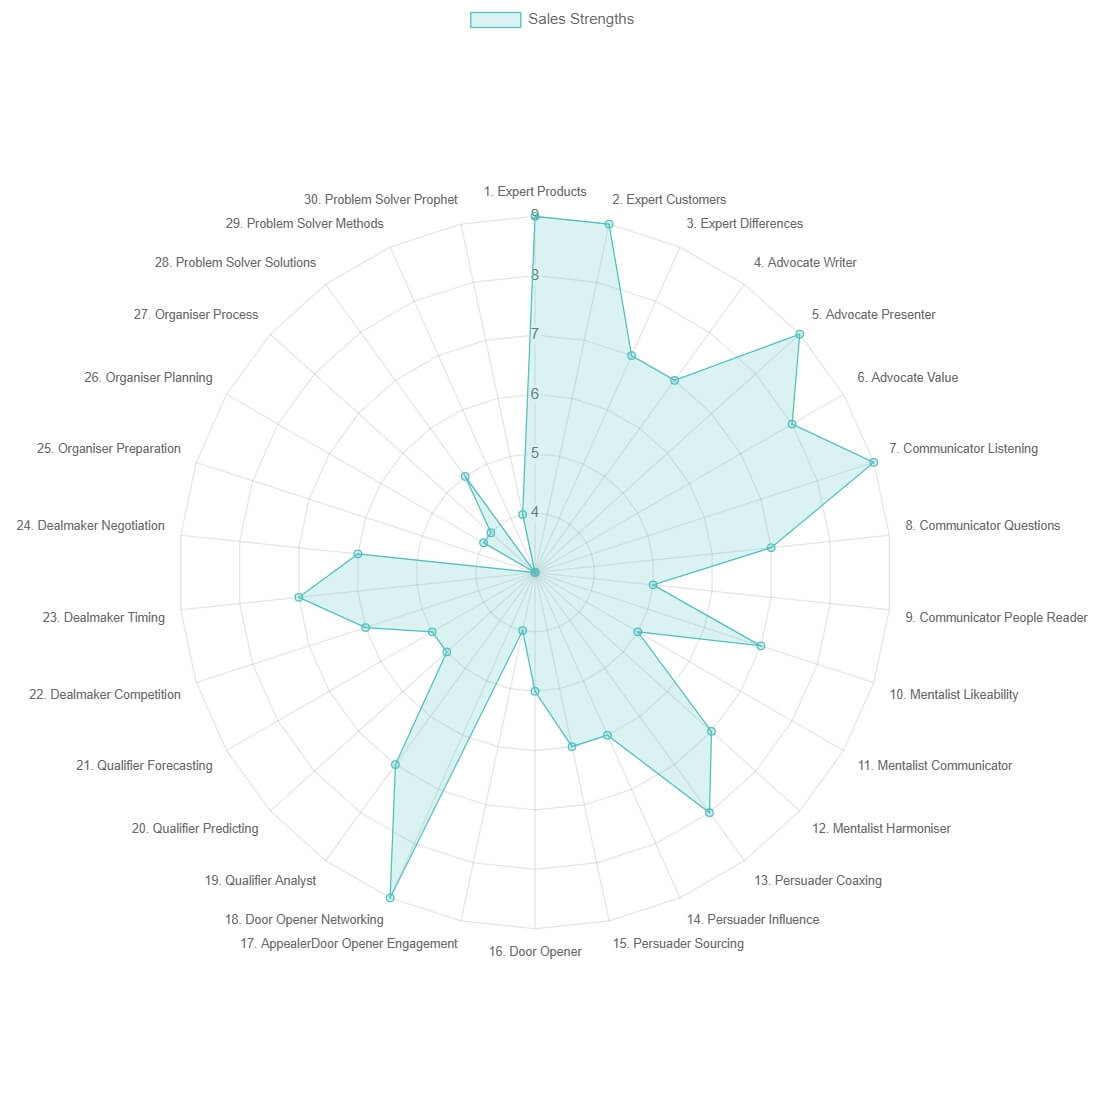 A radar chart showing the results of our sales skills assessment.